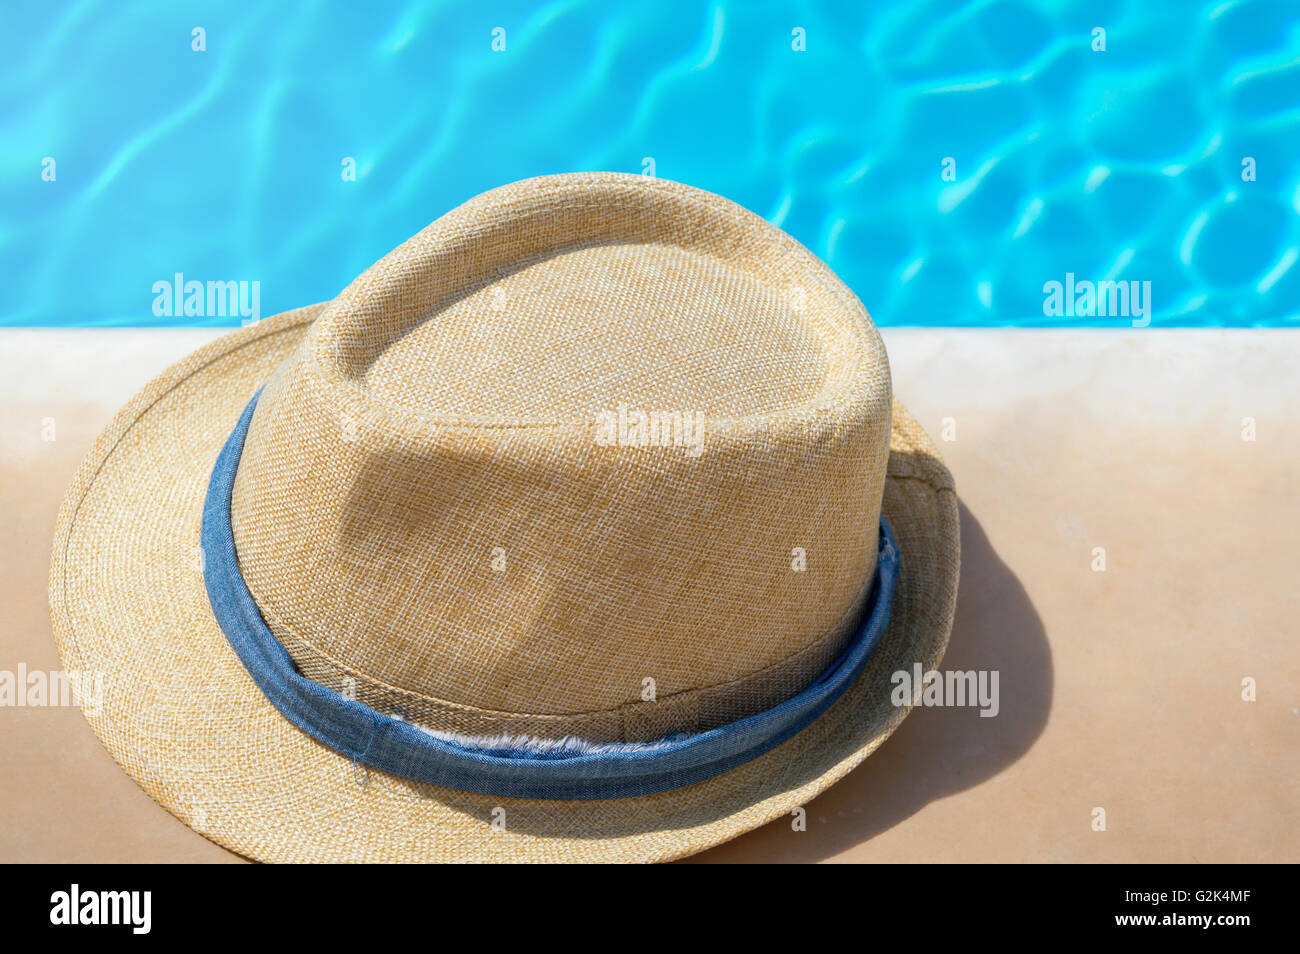 Straw hat with blue band by the pool Stock Photo